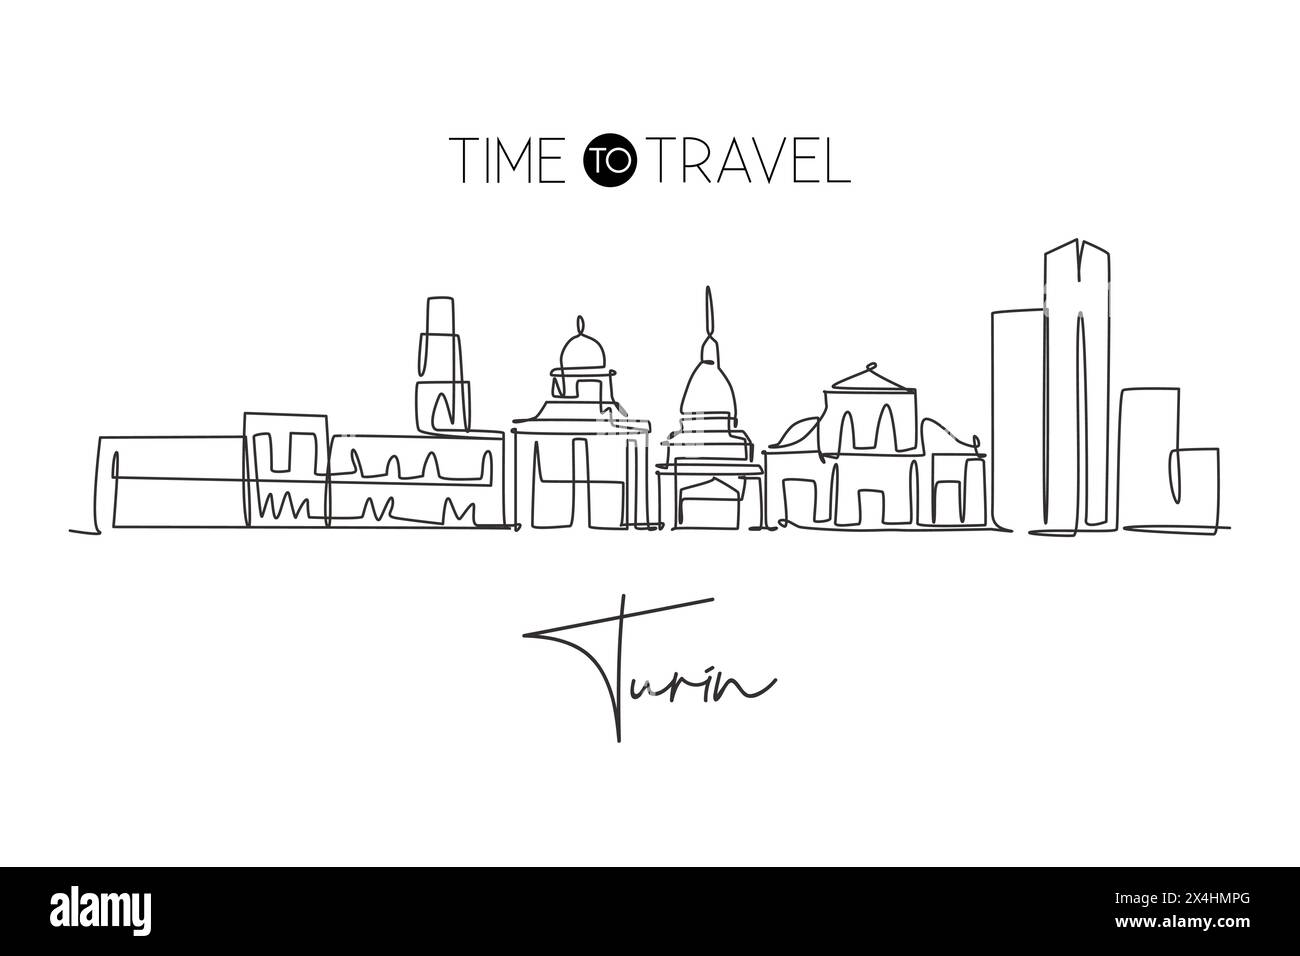 Single continuous line drawing of Turin city skyline, Italy. Famous skyscraper landscape postcard. World travel home wall decor poster print concept. Stock Vector